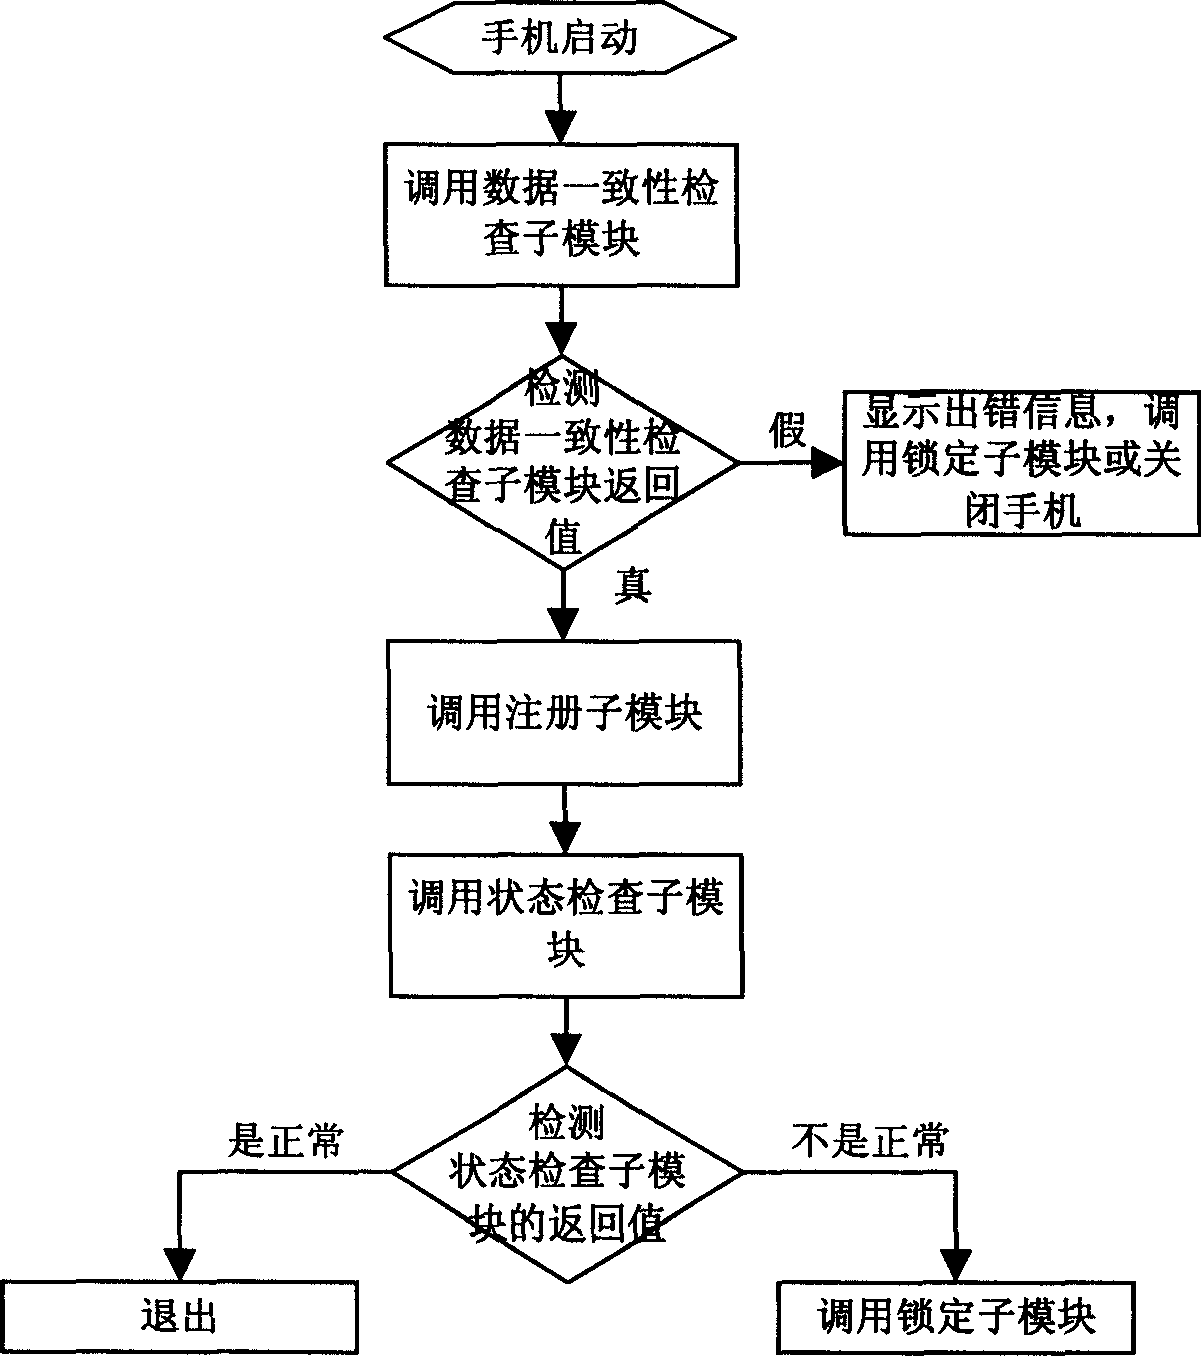 System and method for preventing software and hardware with communication condition/function against embezzlement